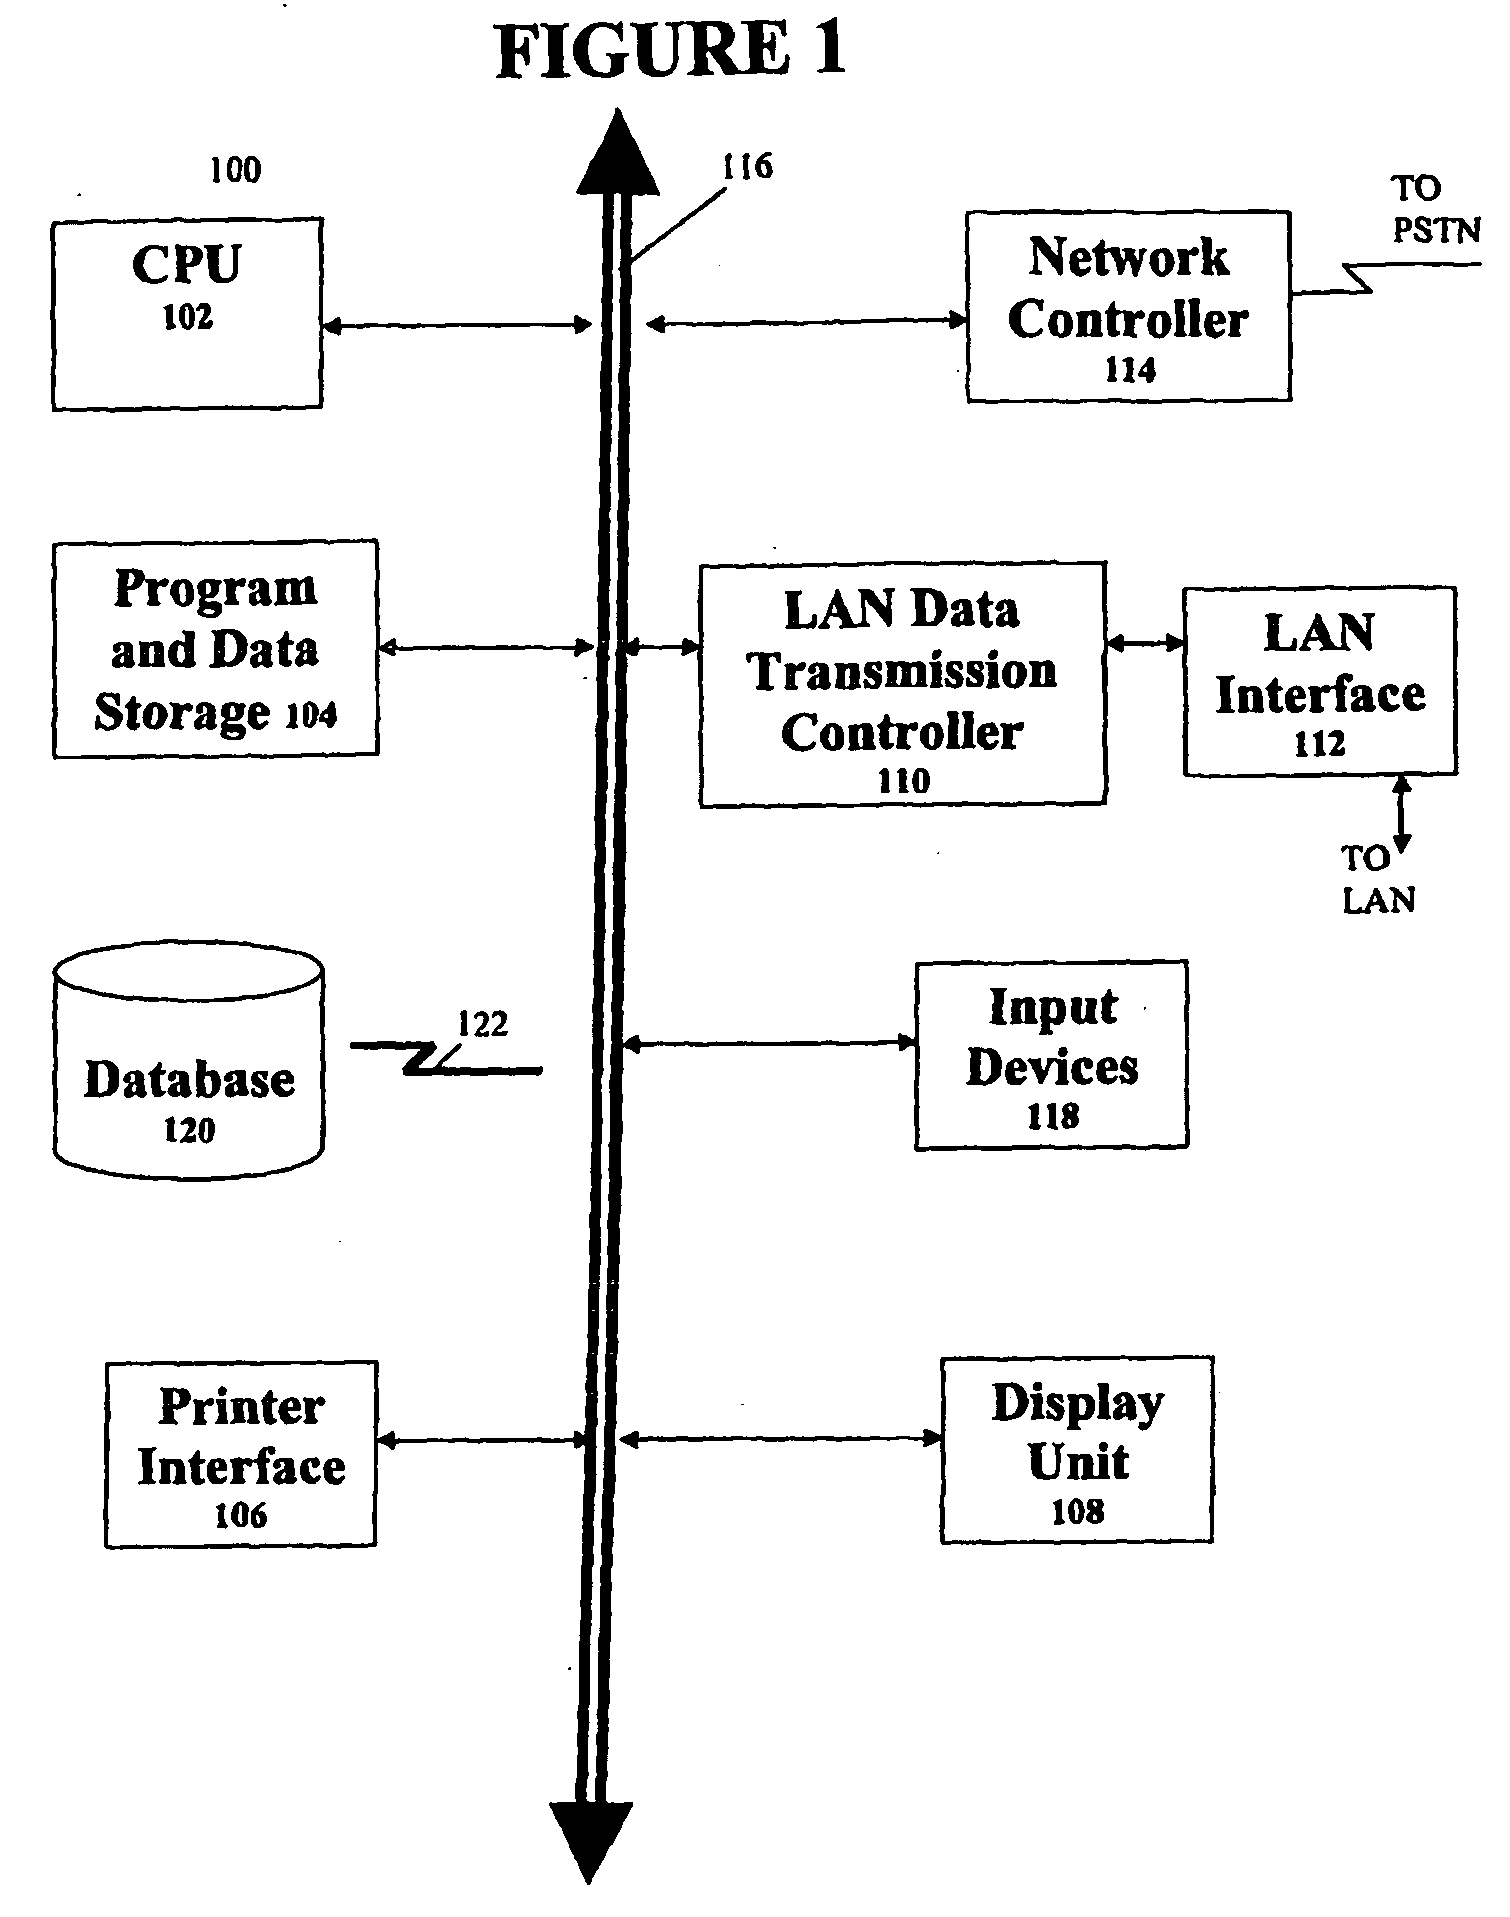 Method and System for Automatically Measuring Retail Store Display Compliance